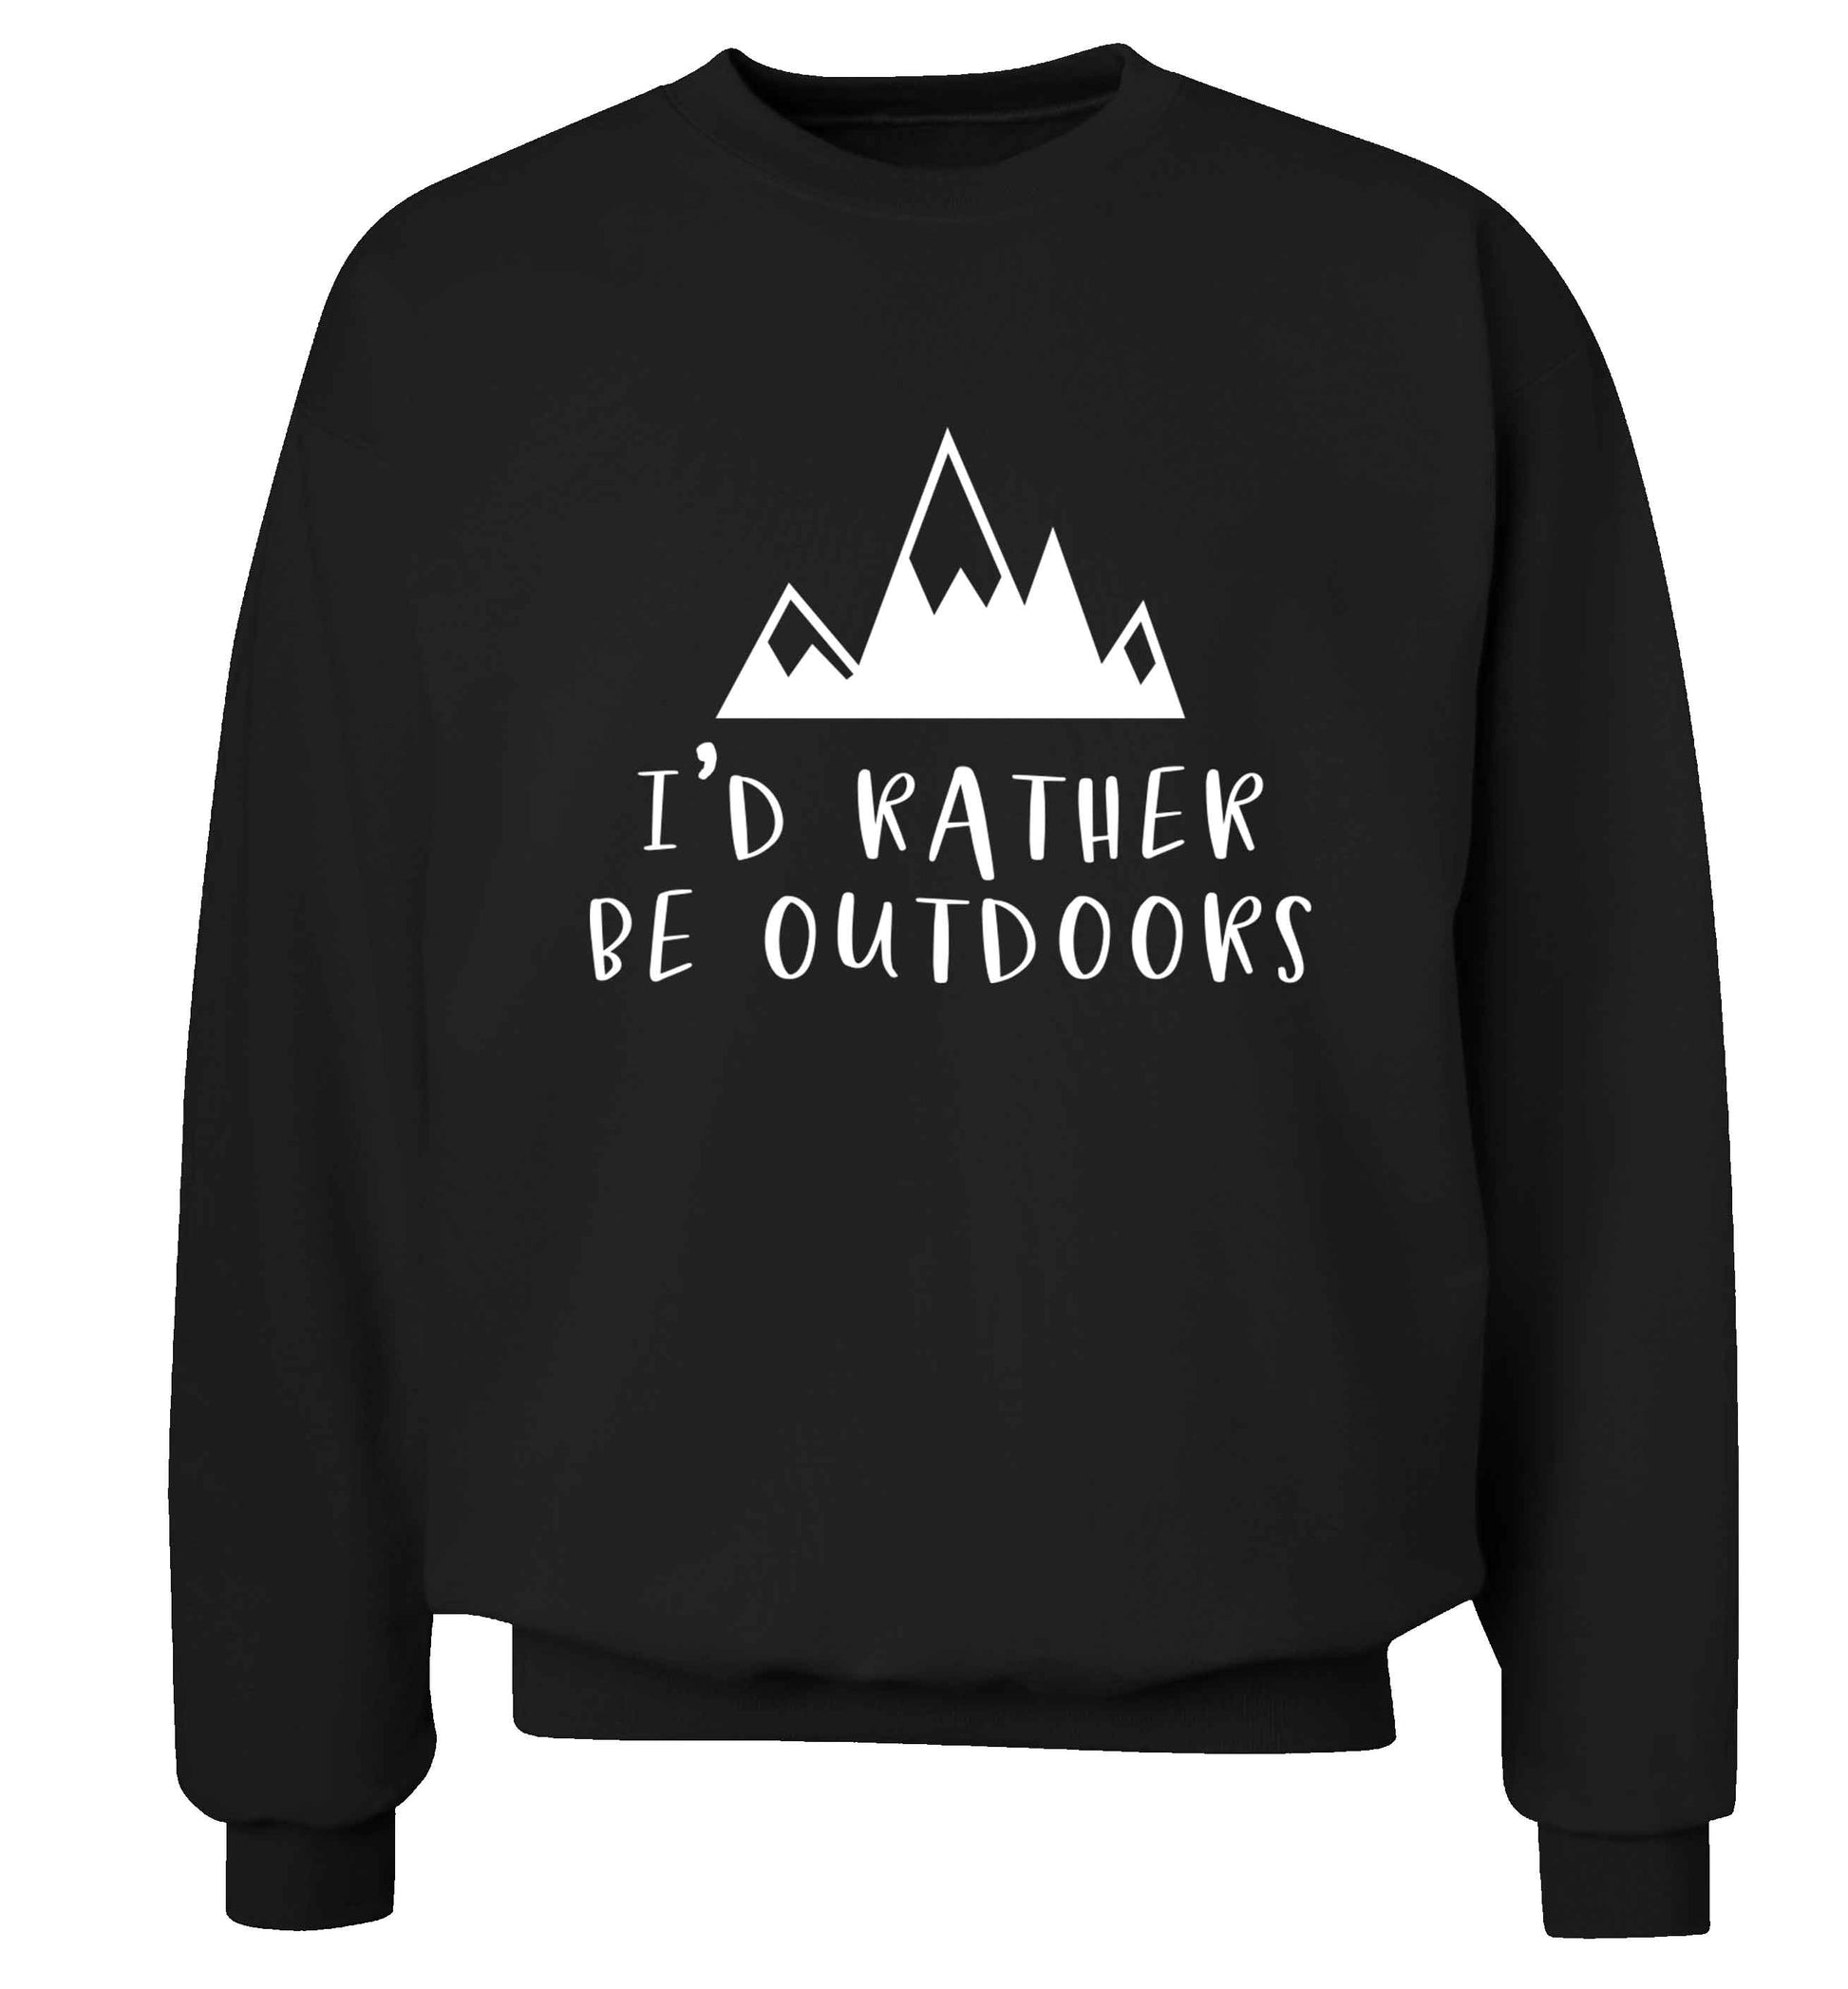 I'd rather be outdoors Adult's unisex black Sweater 2XL